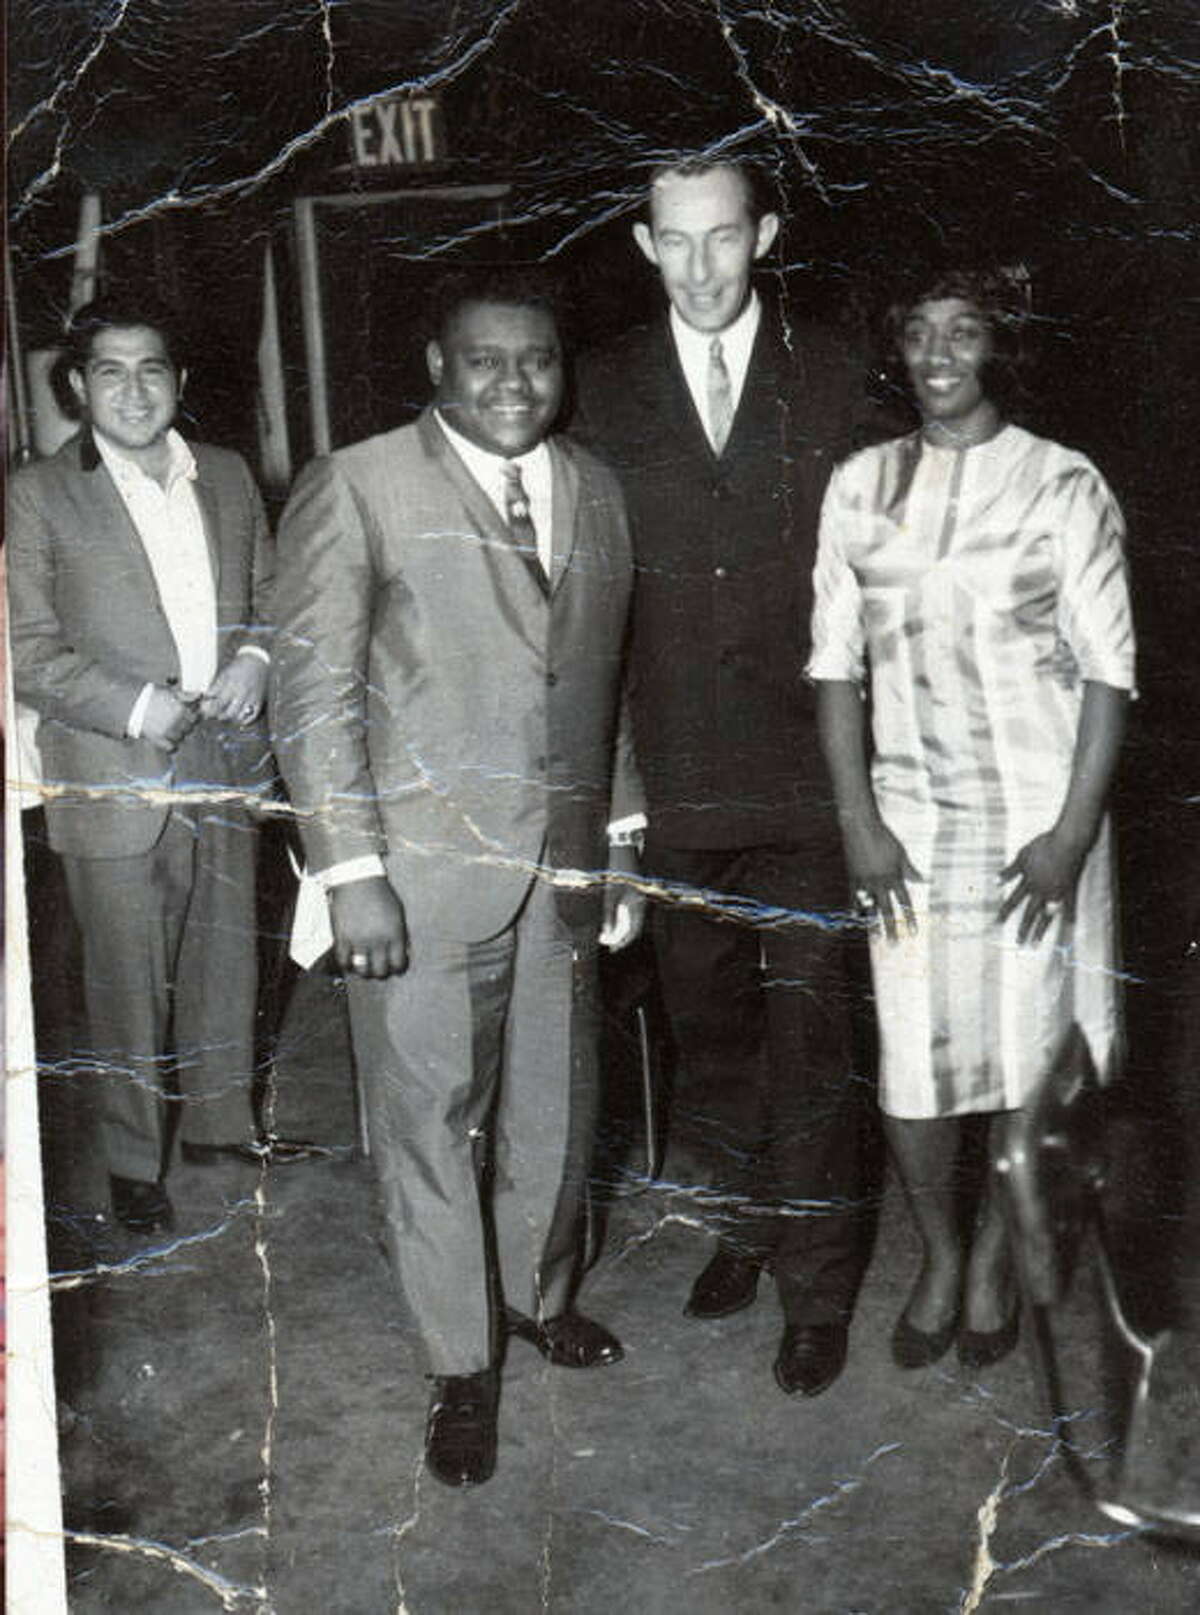 Fats Domino and Velma Patterson 'Miss Wiggles' with a fan at Eastwood Country Club, St. Hedwig Road, San Antonio, Texas, ca. 1963.